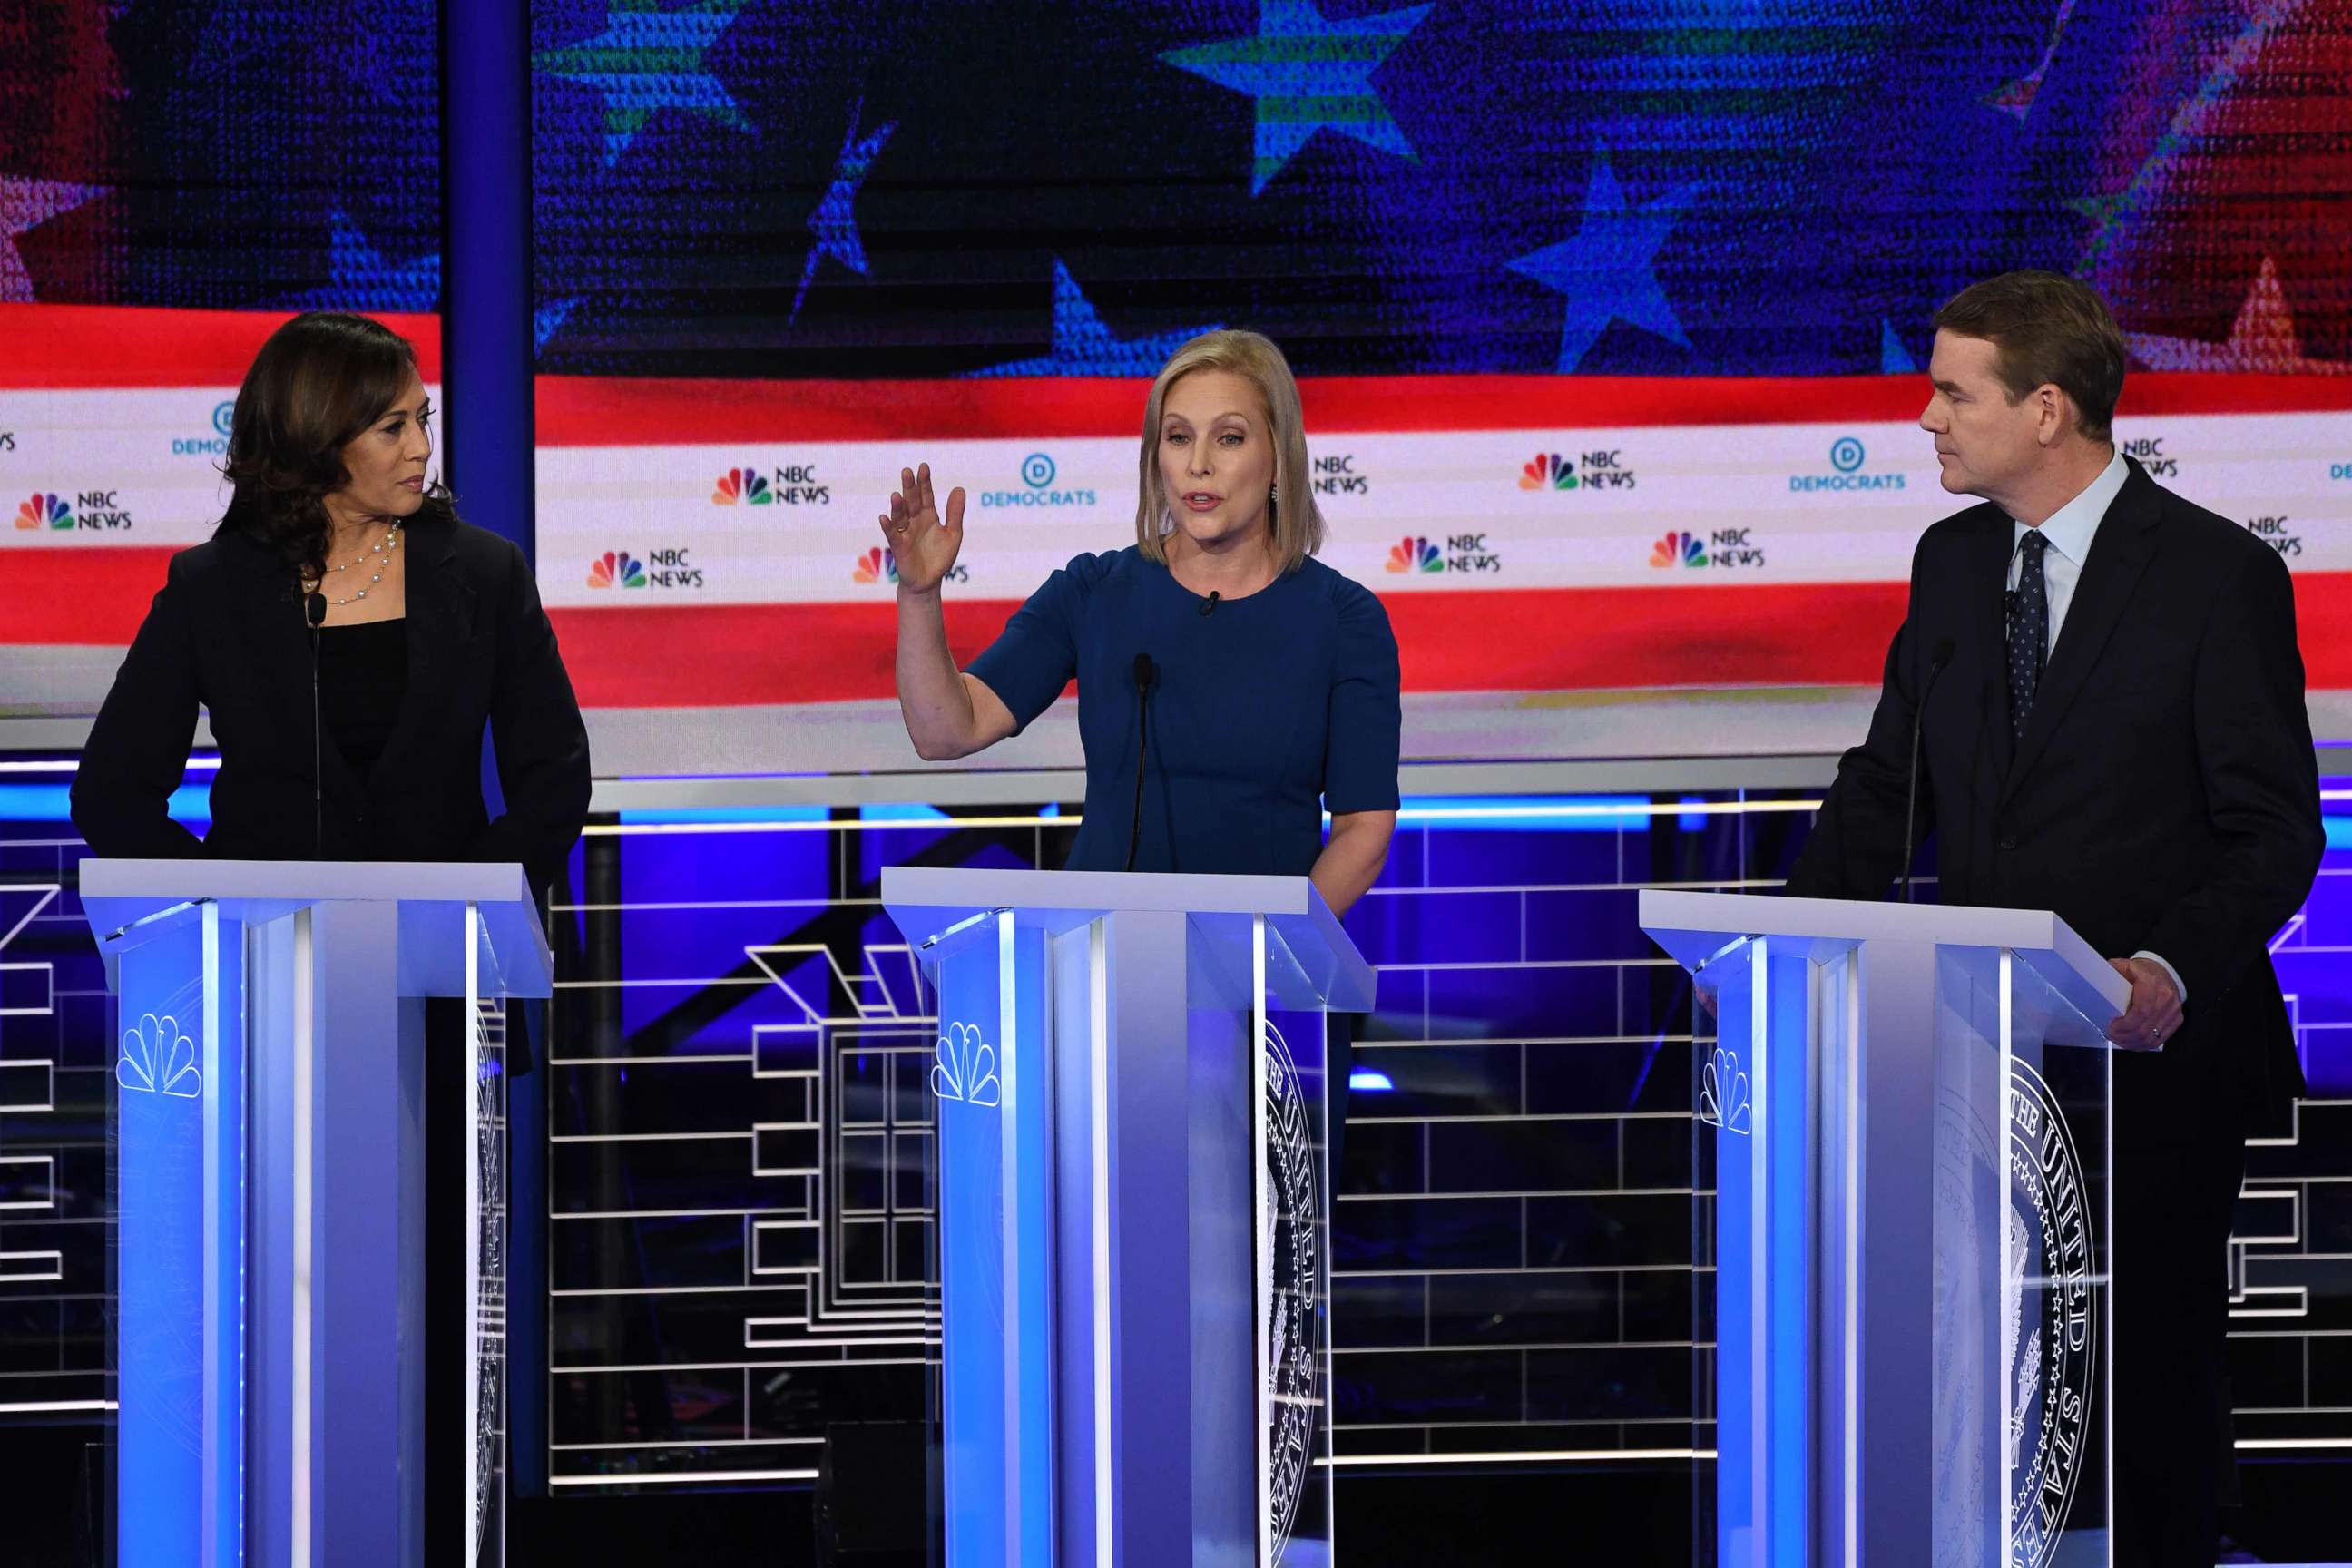 PHOTO: Kamala Harris, Kristen Gillibrand and Michael Bennet participate in the second night of the first 2020 democratic presidential debate at the Adrienne Arsht Center for the Performing Arts in Miami, June 27, 2019.